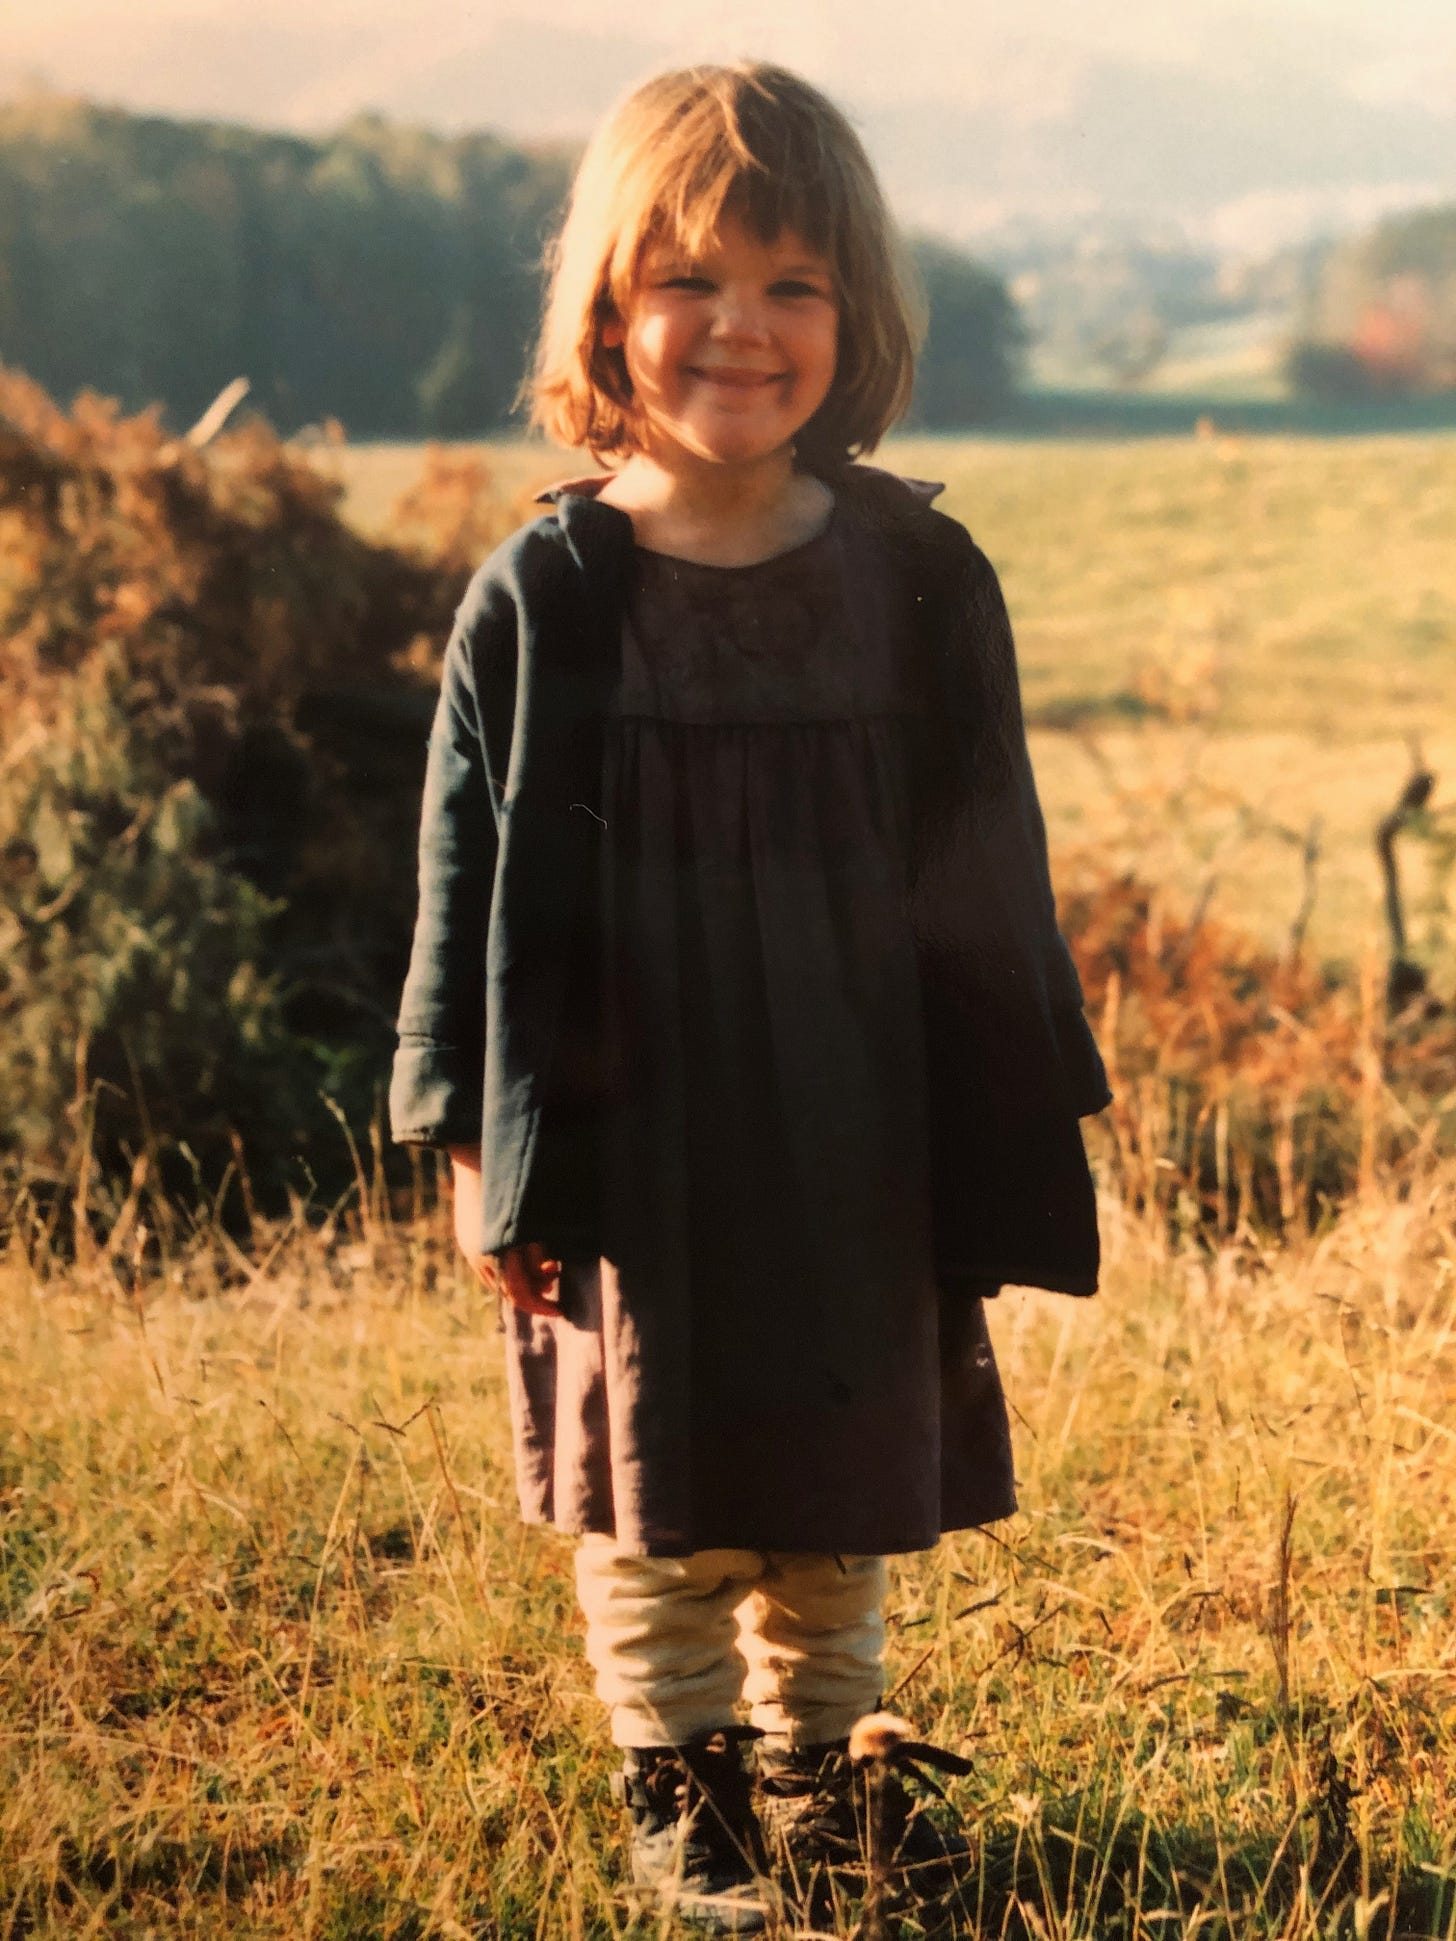 Katharine Duckett, pictured here at 6 or 7 years old, stands in a field on a sunny day, wearing a costume for the period drama "Christy," set in 1912 in East Tennessee. She is white, with brown bobbed hair, and wearing a brown dress, dark blue coat, beige leggings, and brown boots.